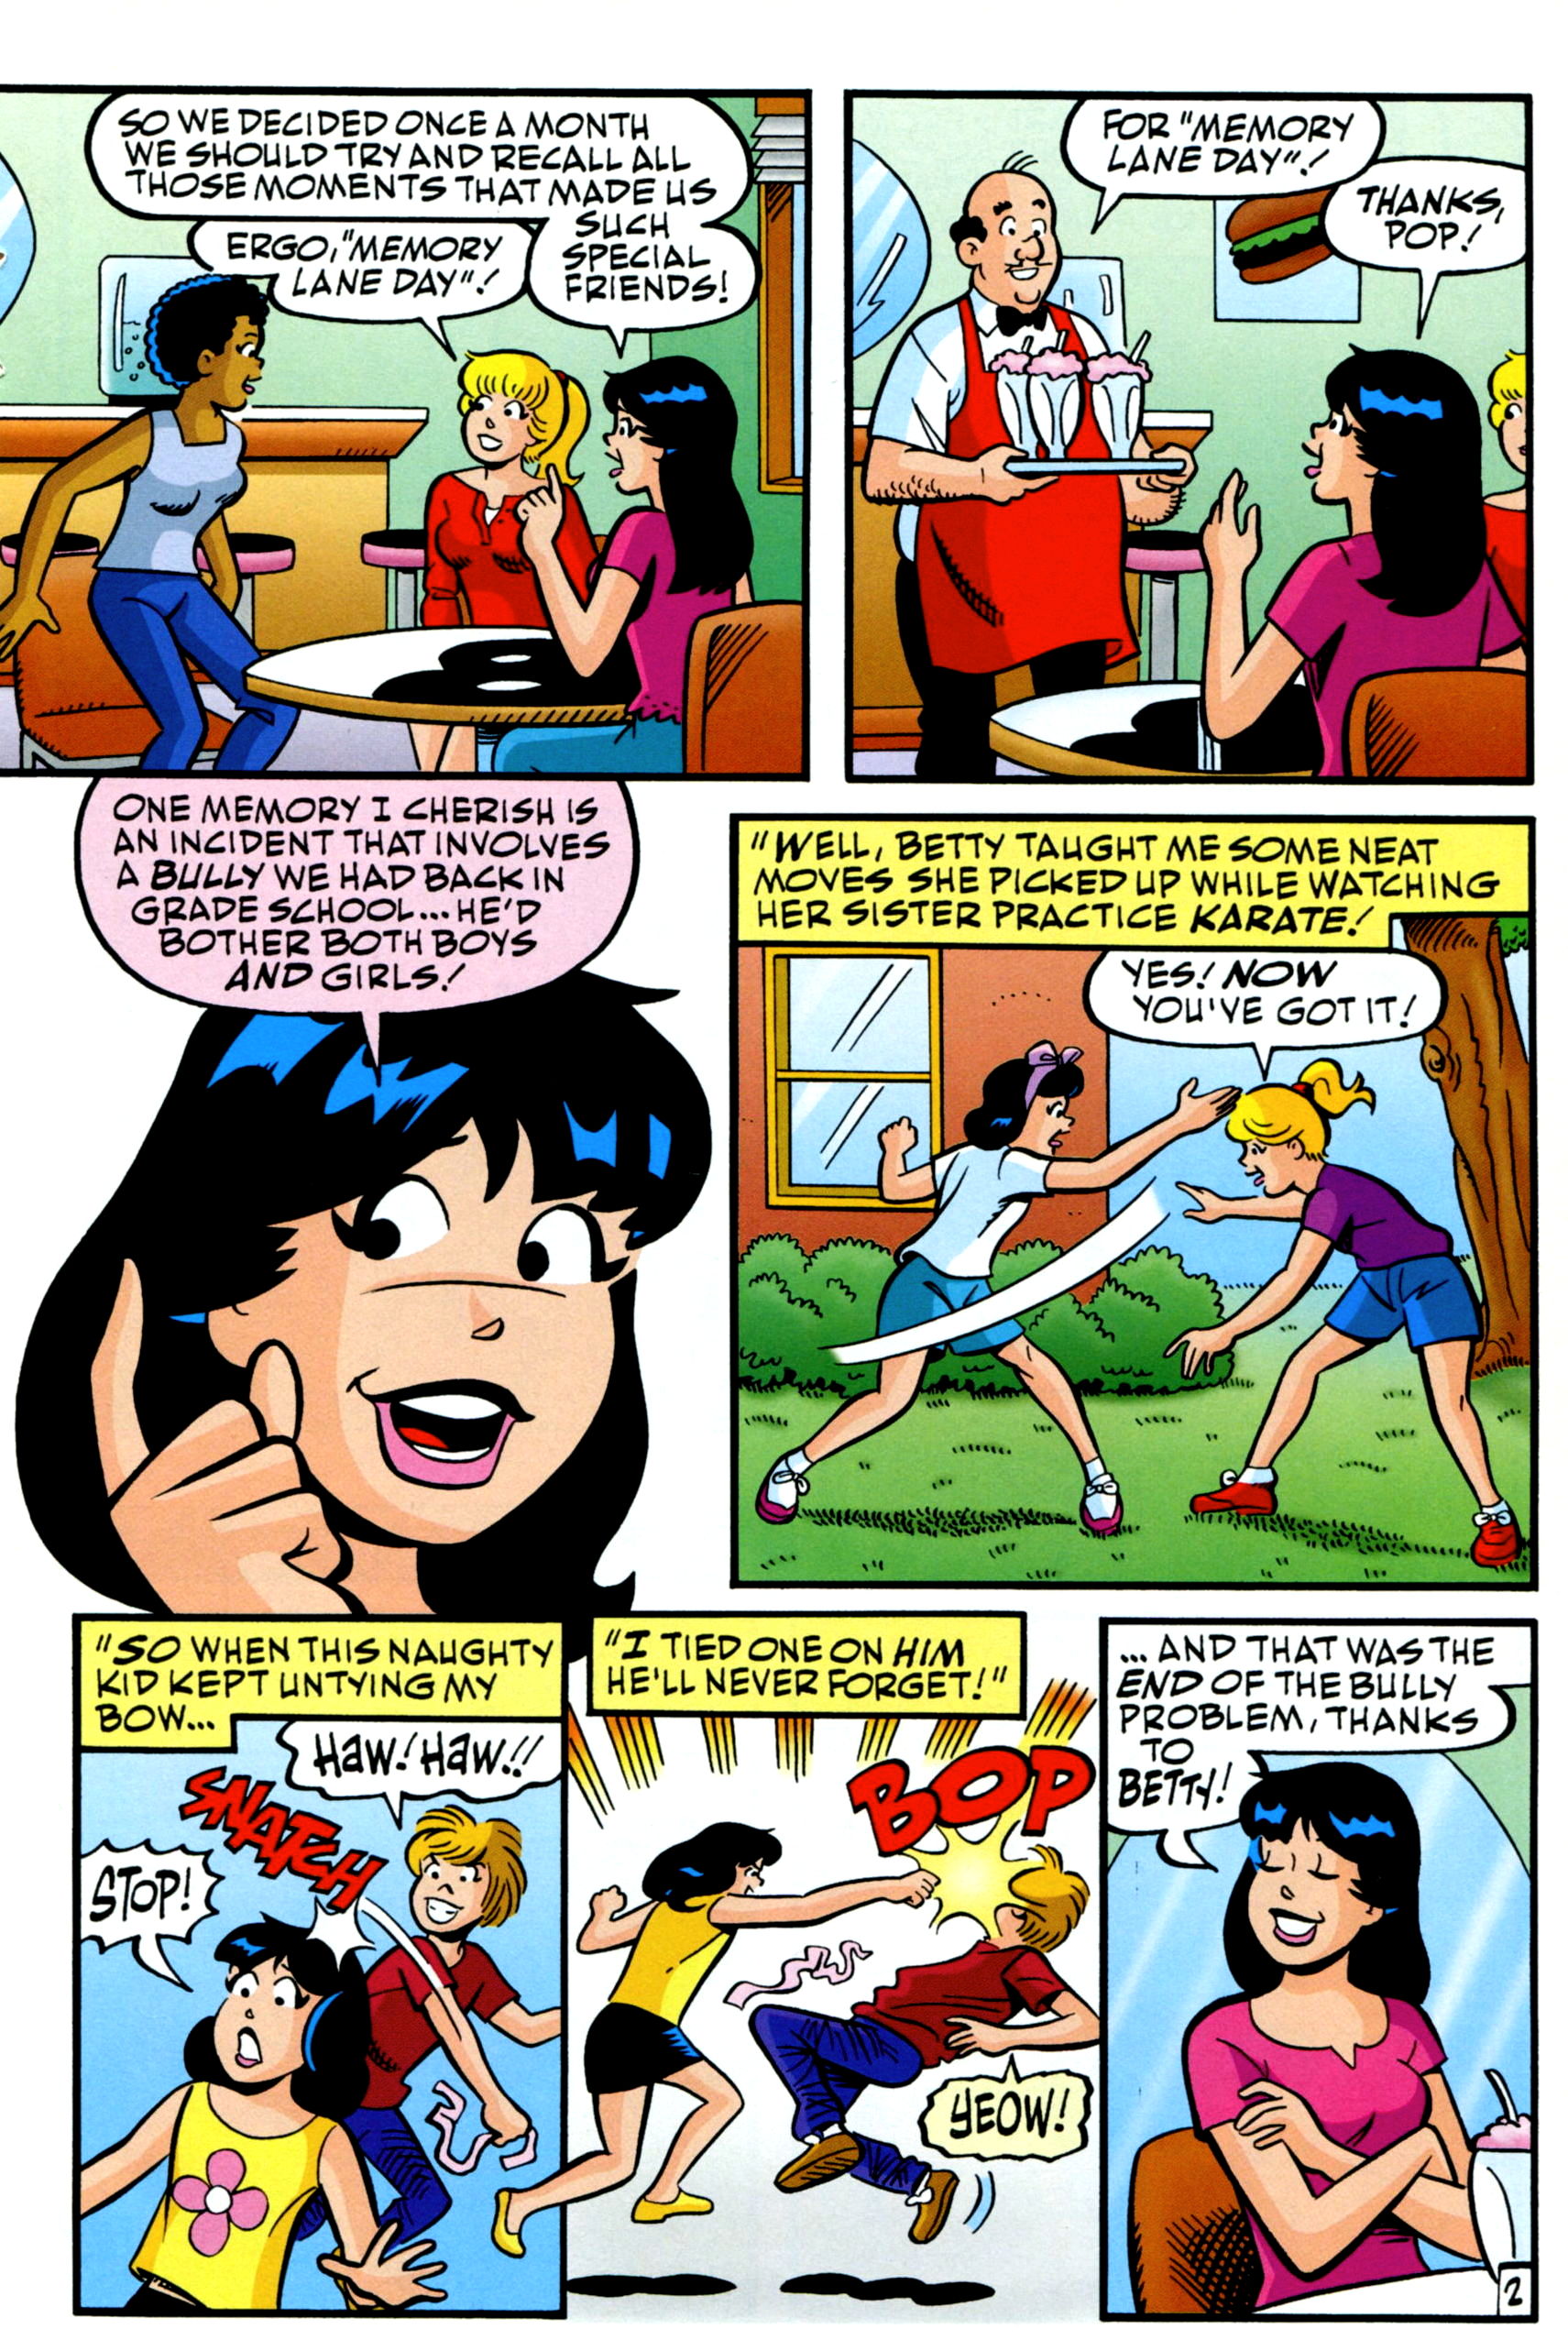 Betty And Veronica Issue 255 Read Betty And Veronica Issue 255 Comic Online In High Quality 